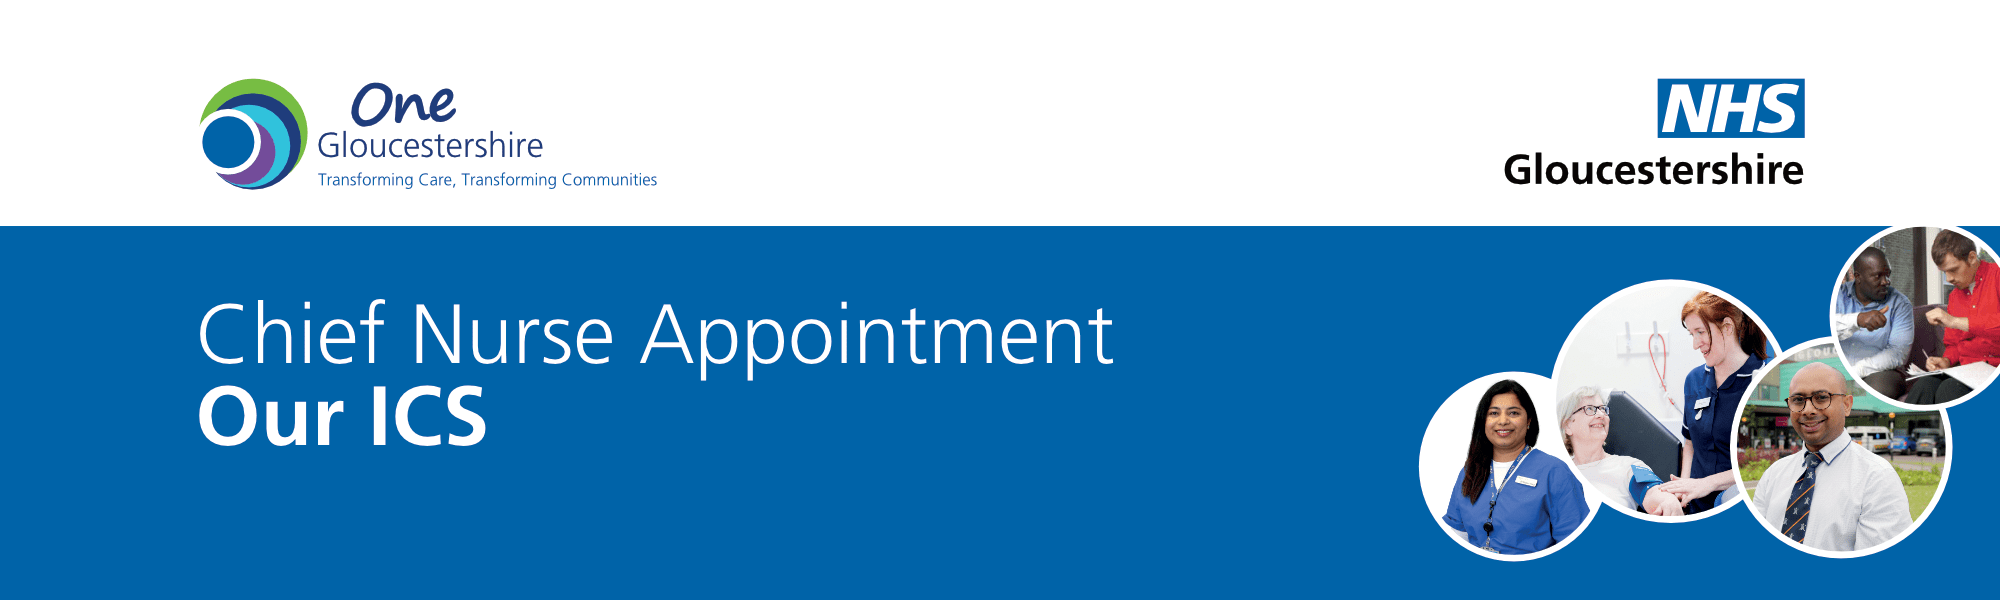 Chief Nurse Appointment - Our ICS